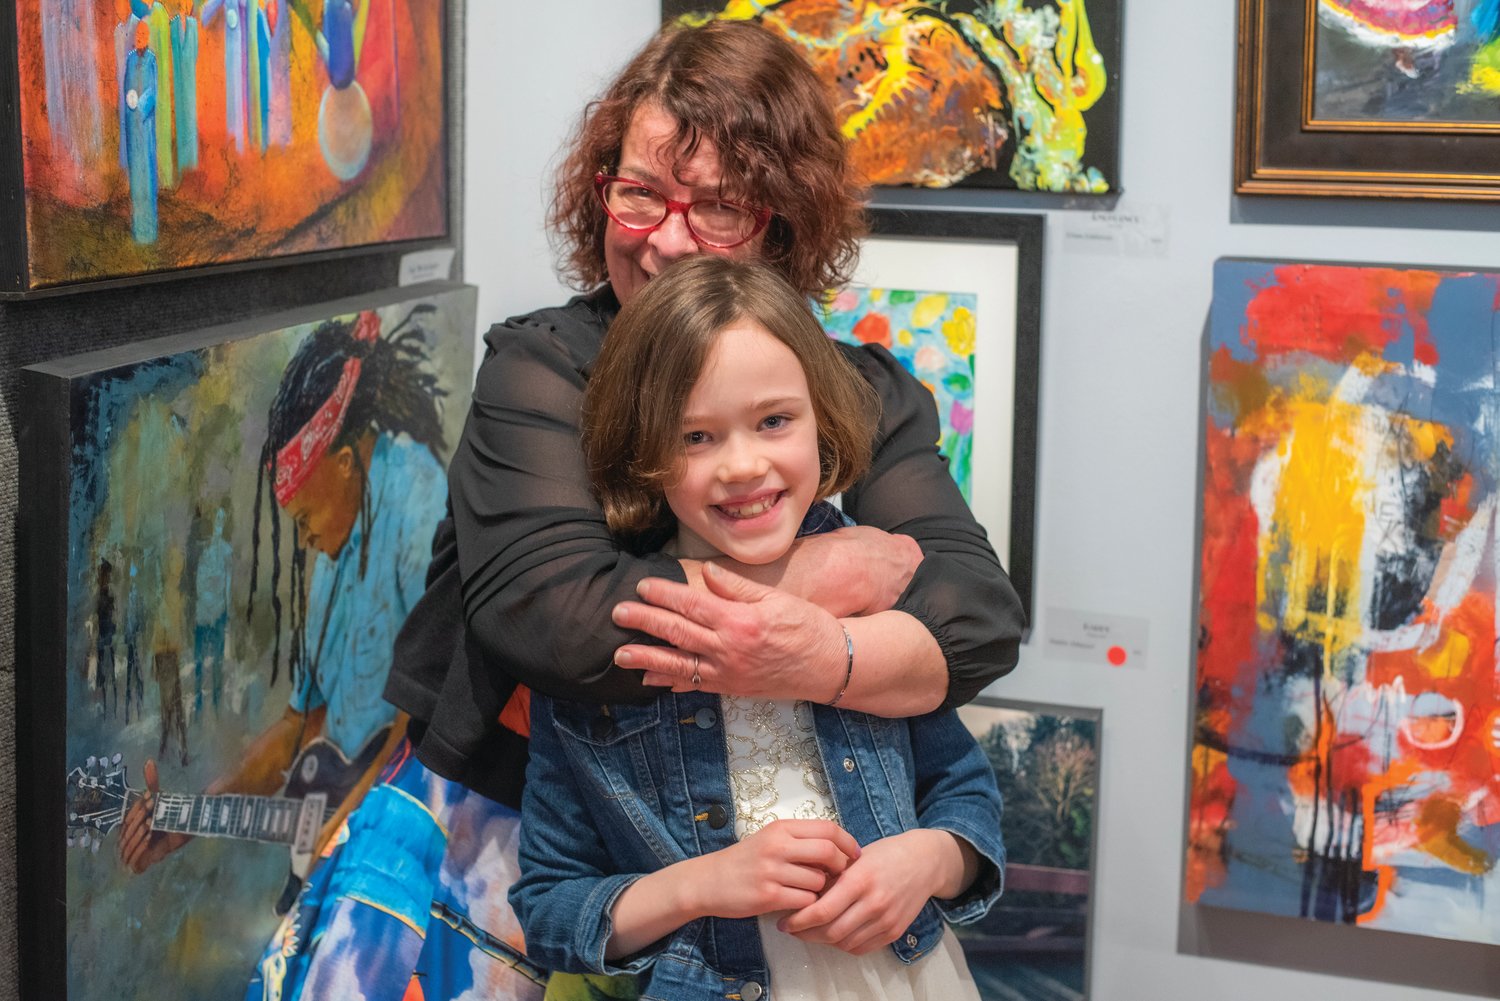 Jan Nontell, owner of the Rectangle Gallery, embraces Haddie Althauser as she sells a work of art Friday in Centralia.